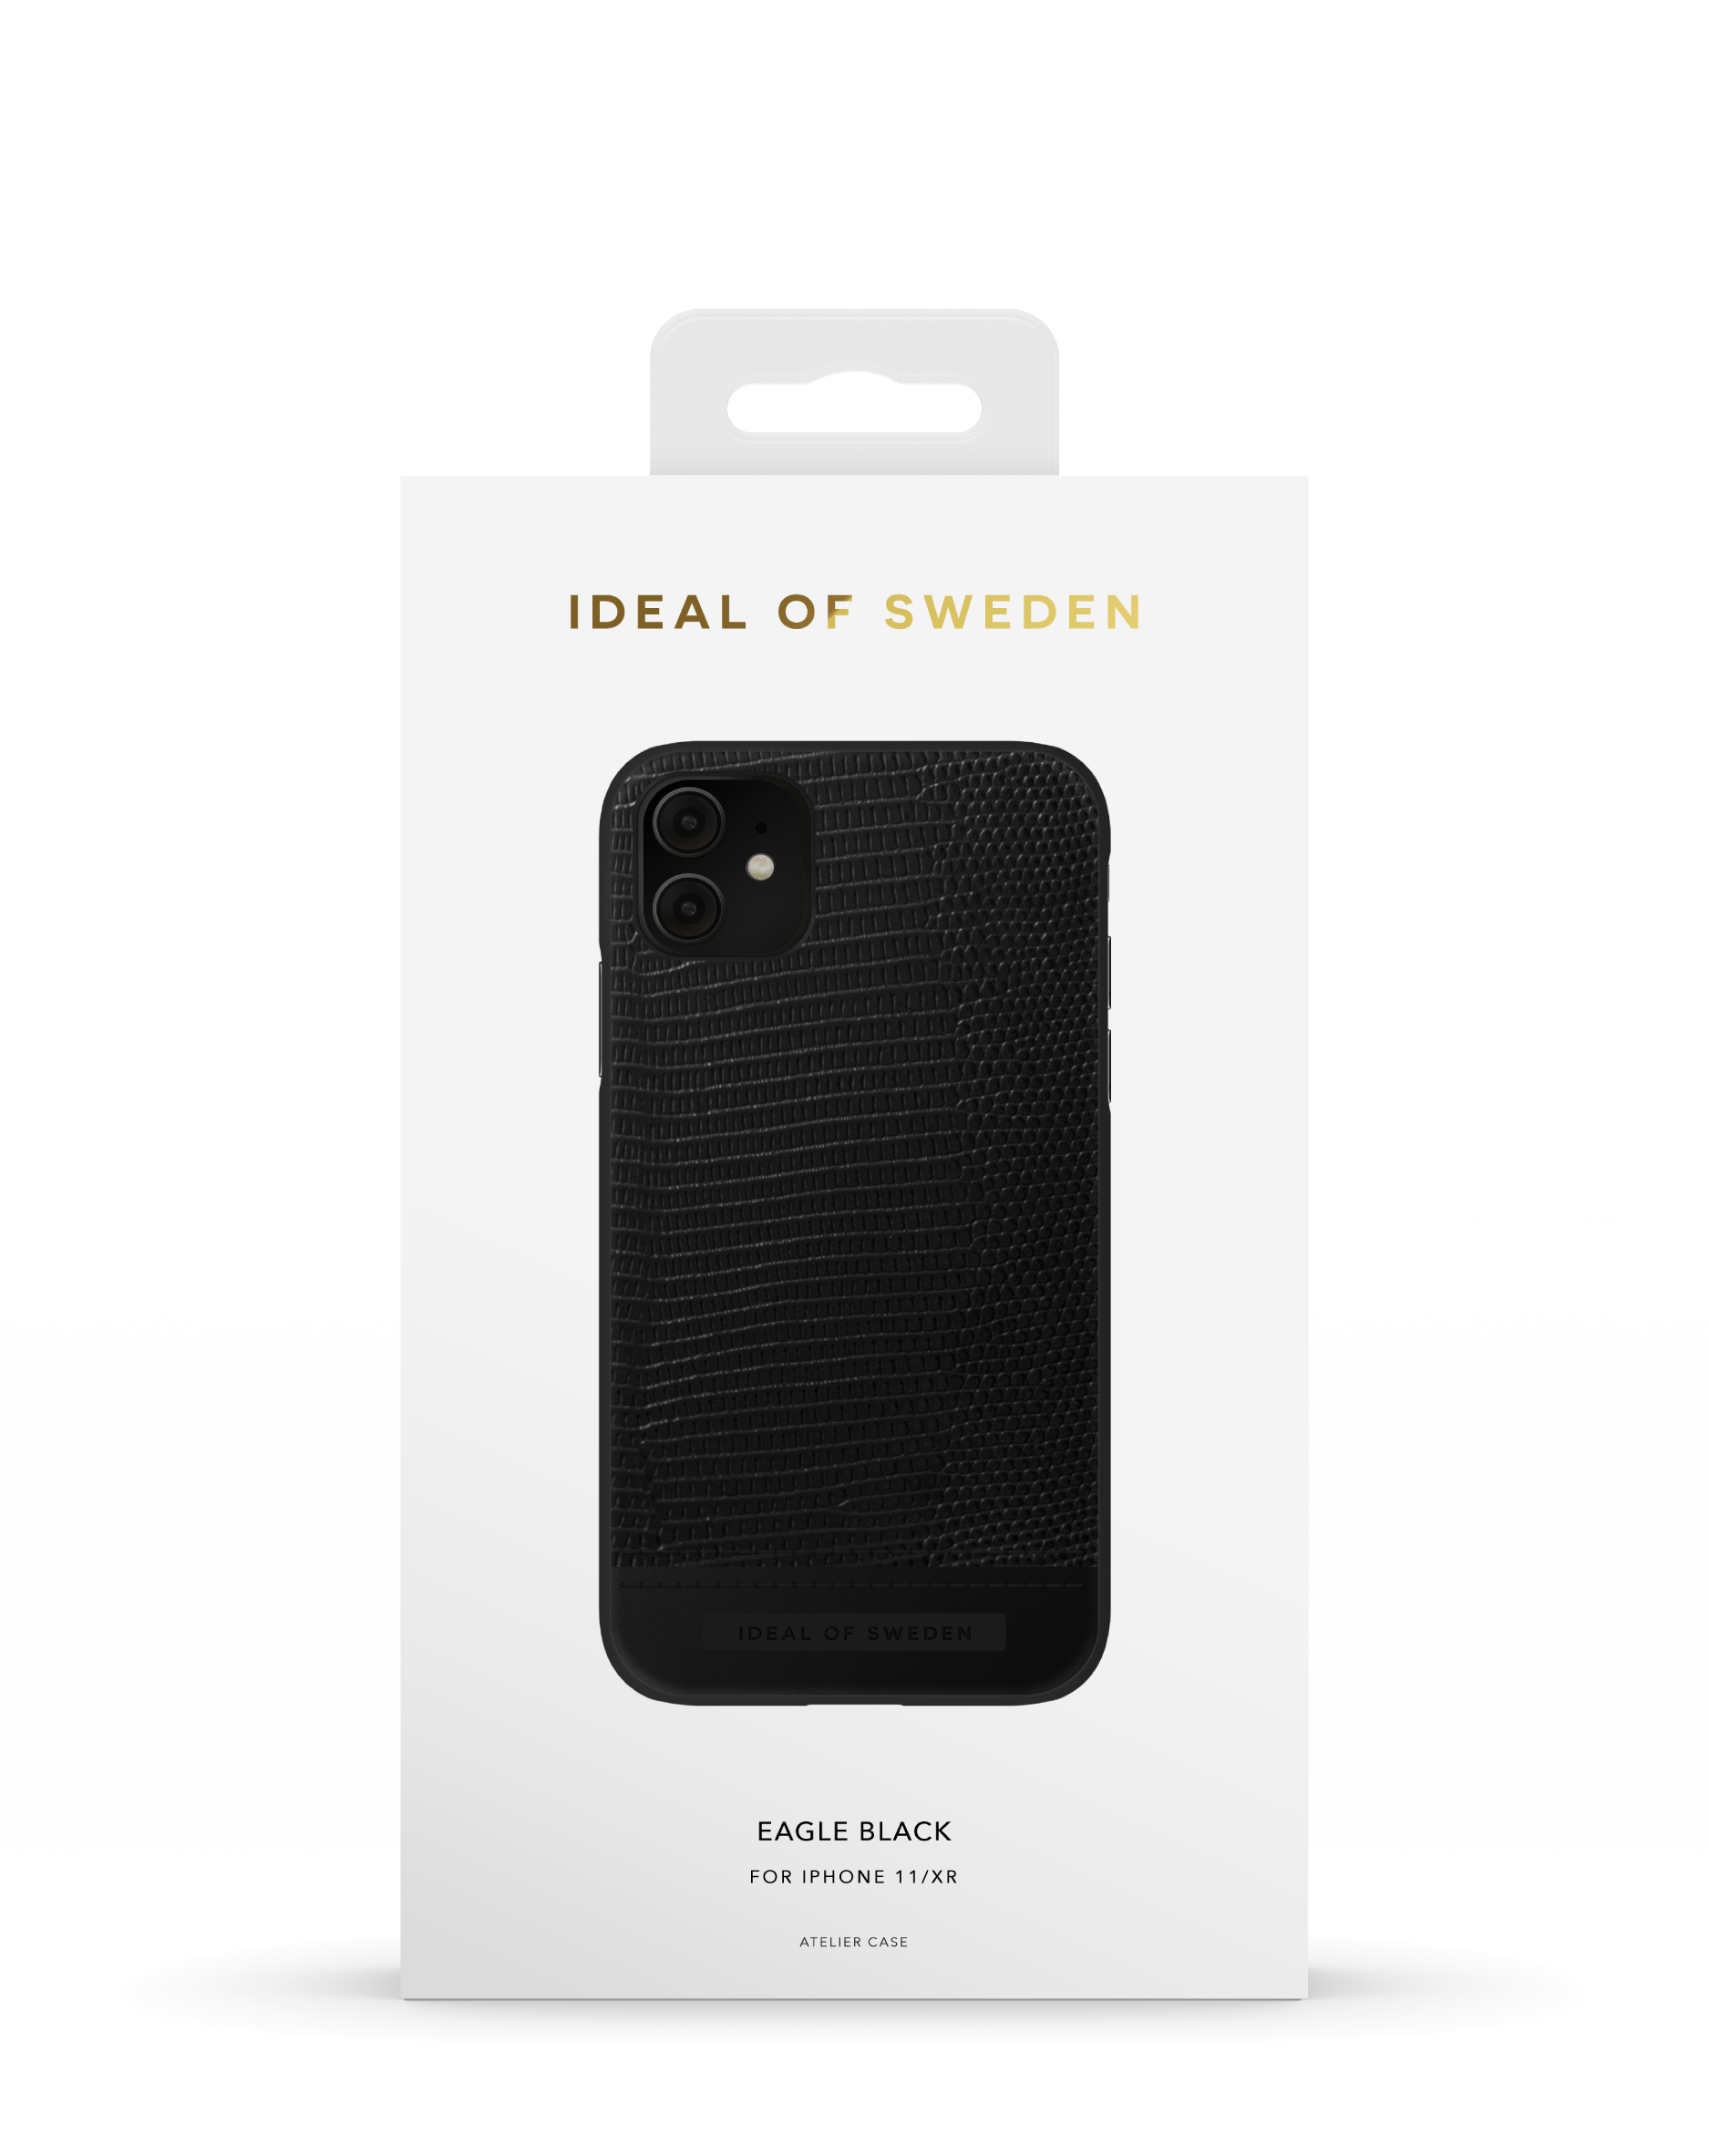 SWEDEN Black XR, IDACAW20-1961-229, iPhone Apple, IDEAL OF Backcover, Eagle iPhone 11,